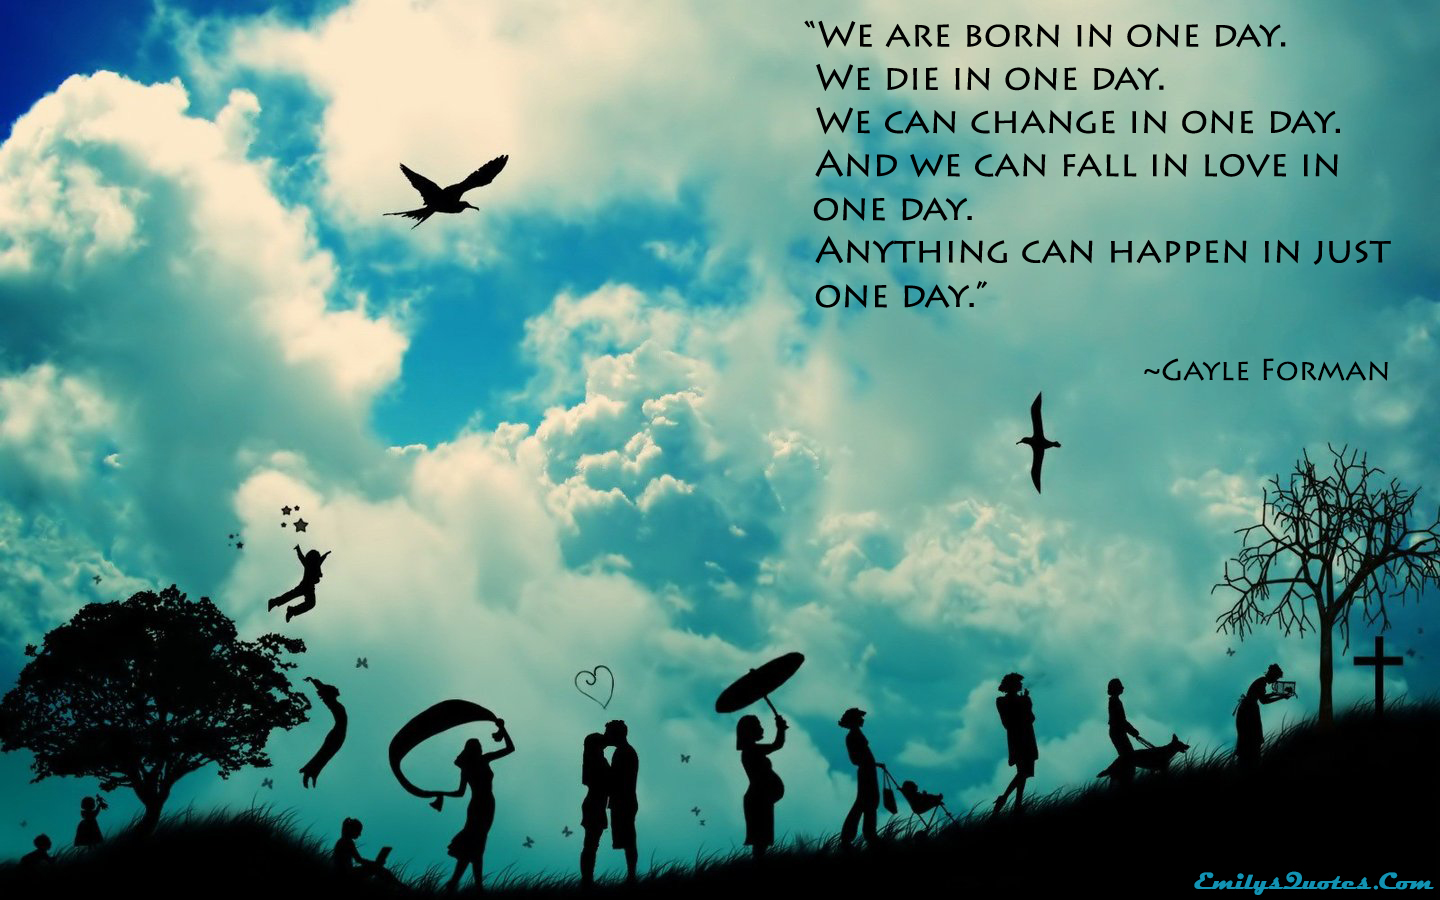 We are born in one day. We die in one day. We can change in one day. And we can fall in